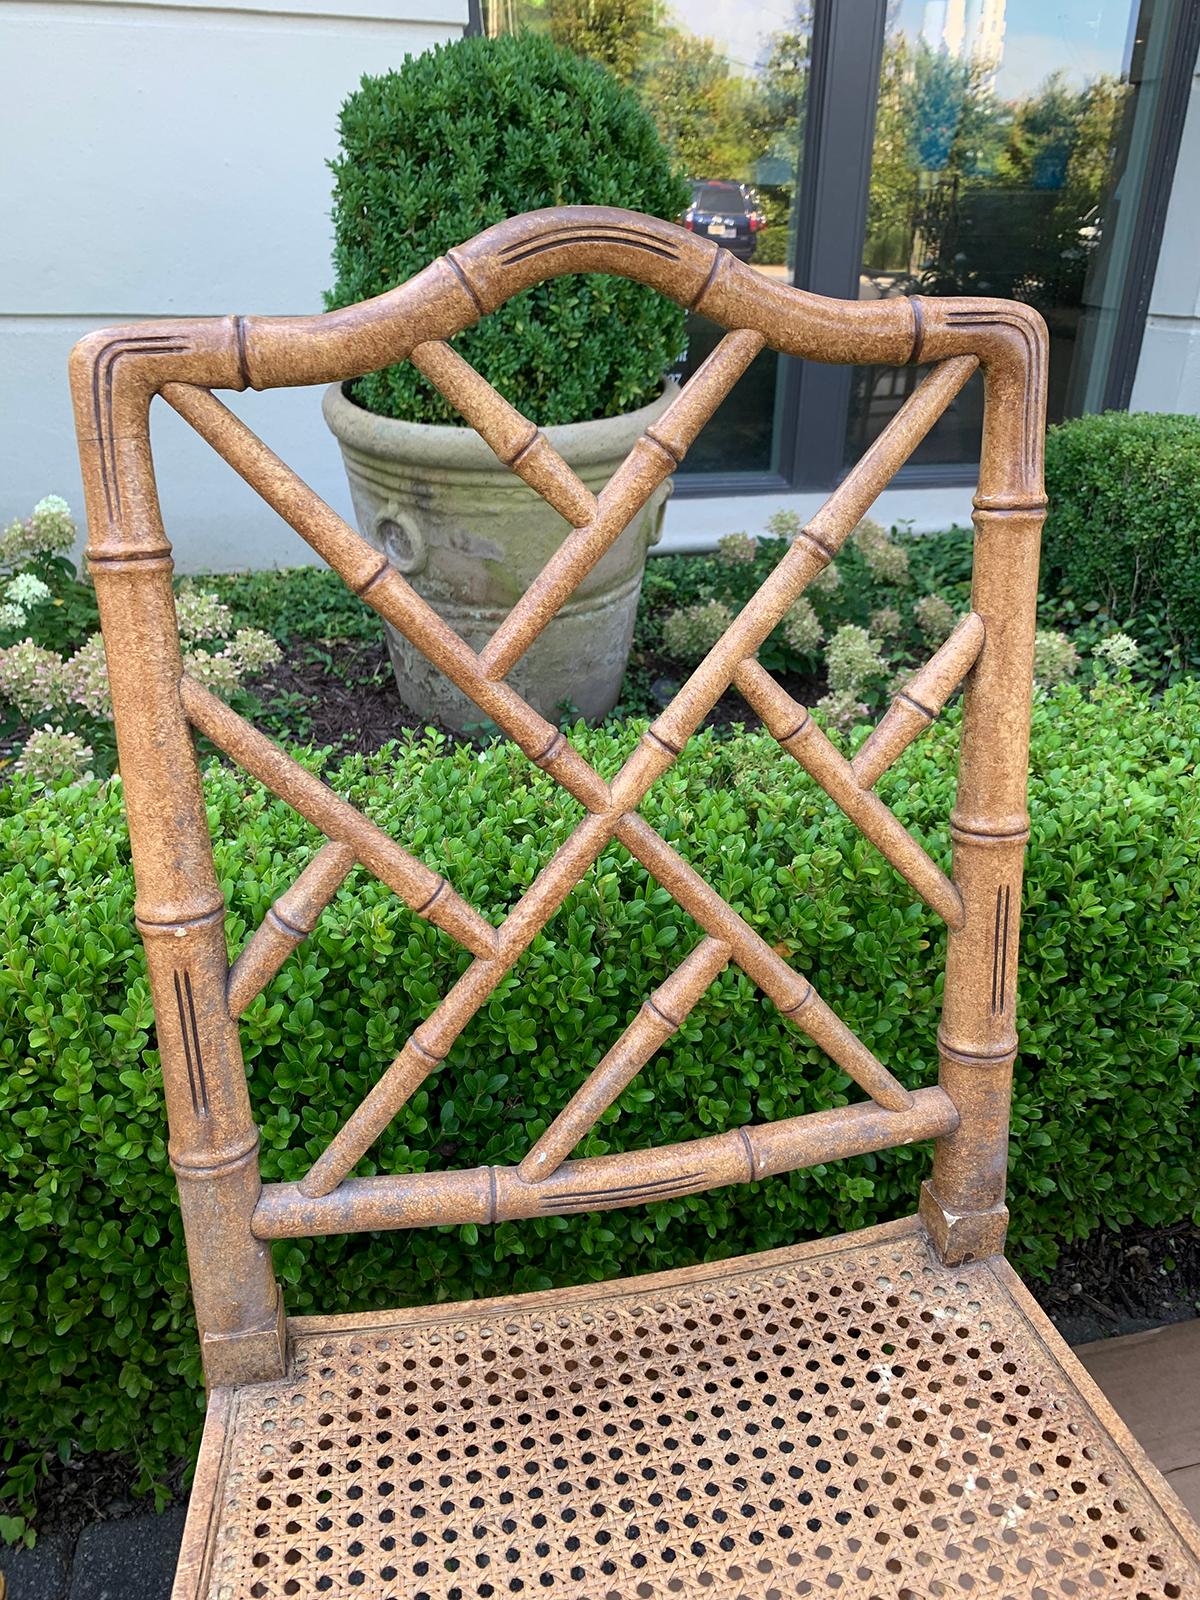 Mid-20th century faux bamboo side chair with cane seat.